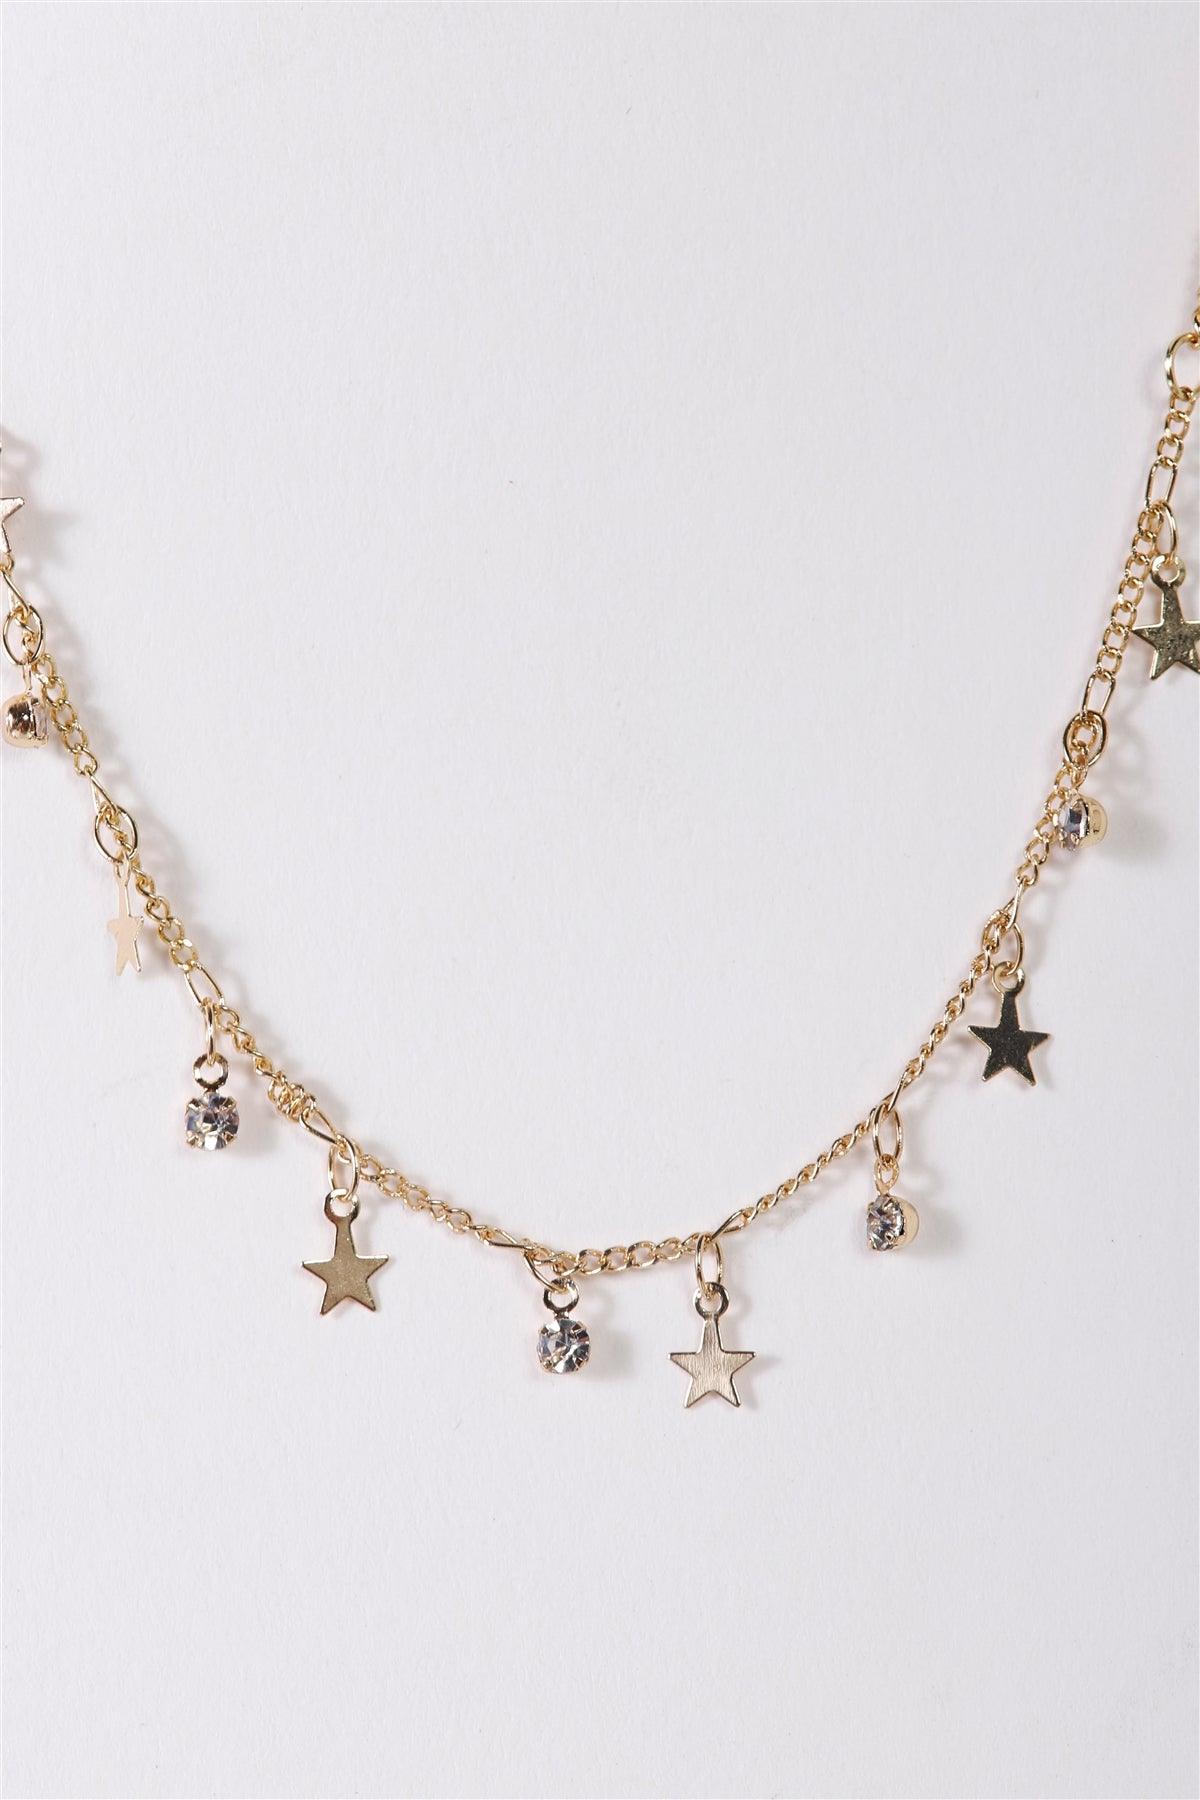 Gold Link Chain With Star & Faux Diamond Charms Necklace /3 Pieces